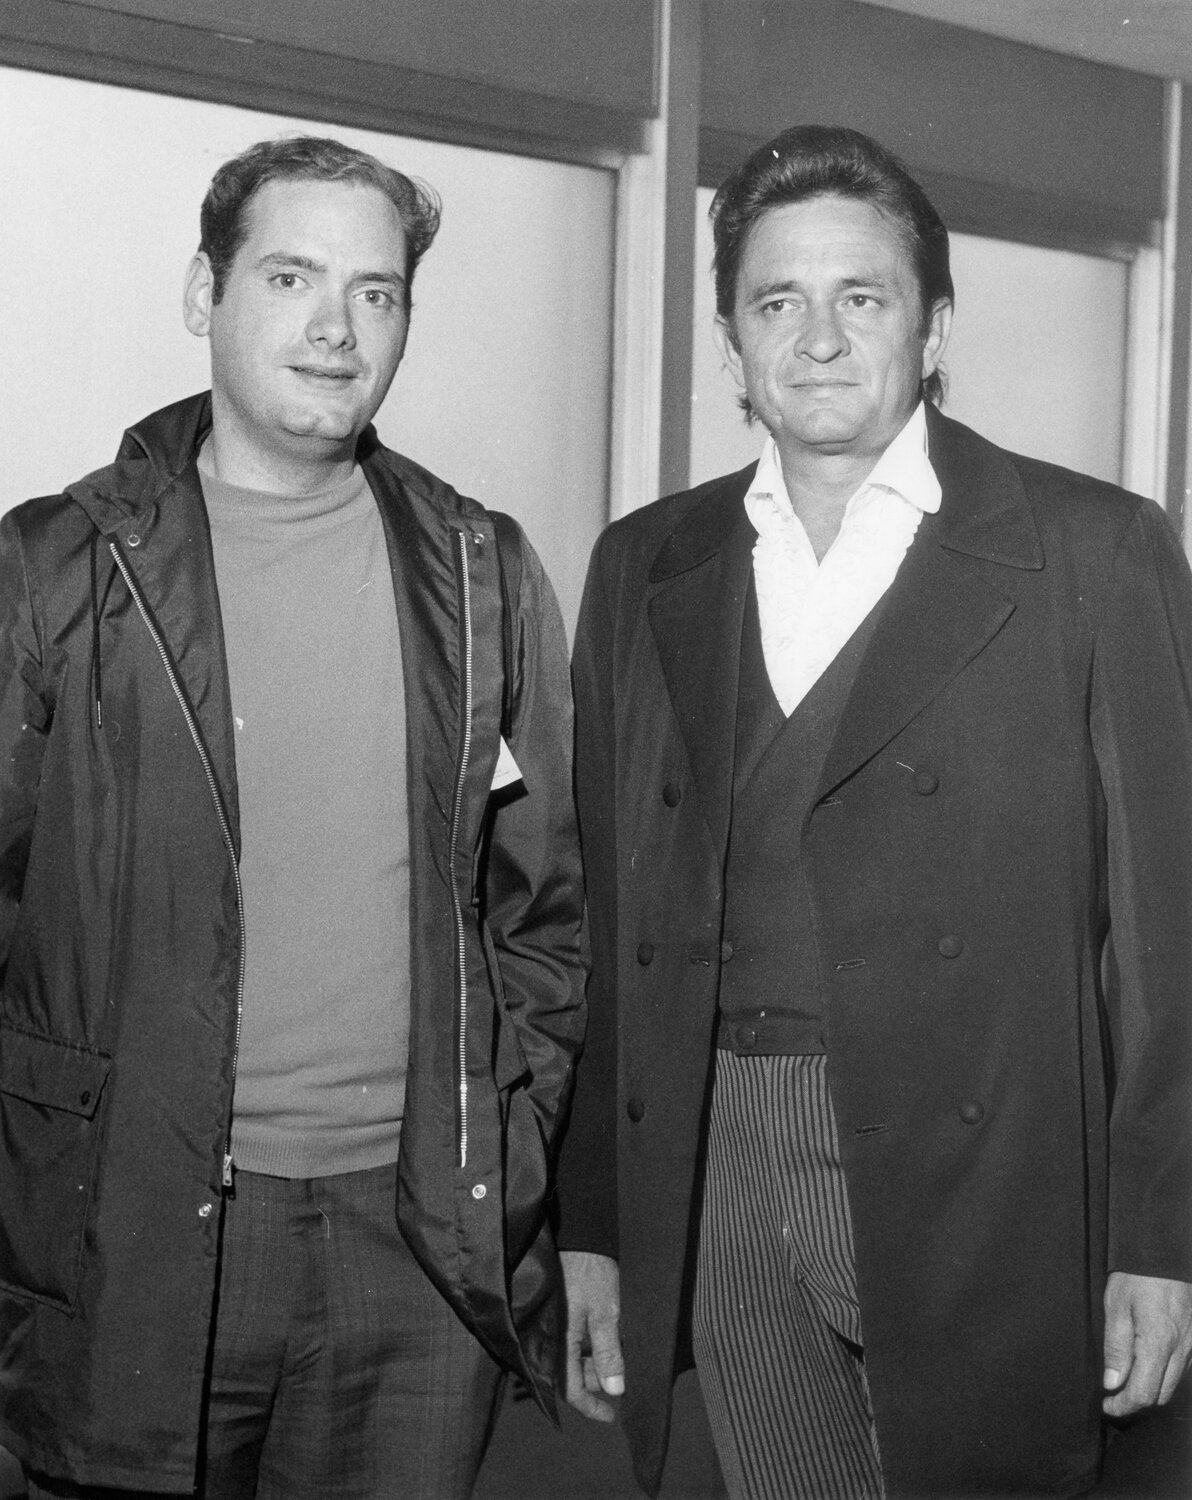 Dave Carmine poses with Johnny Cash, one of the many celebrities he met during his long radio career.